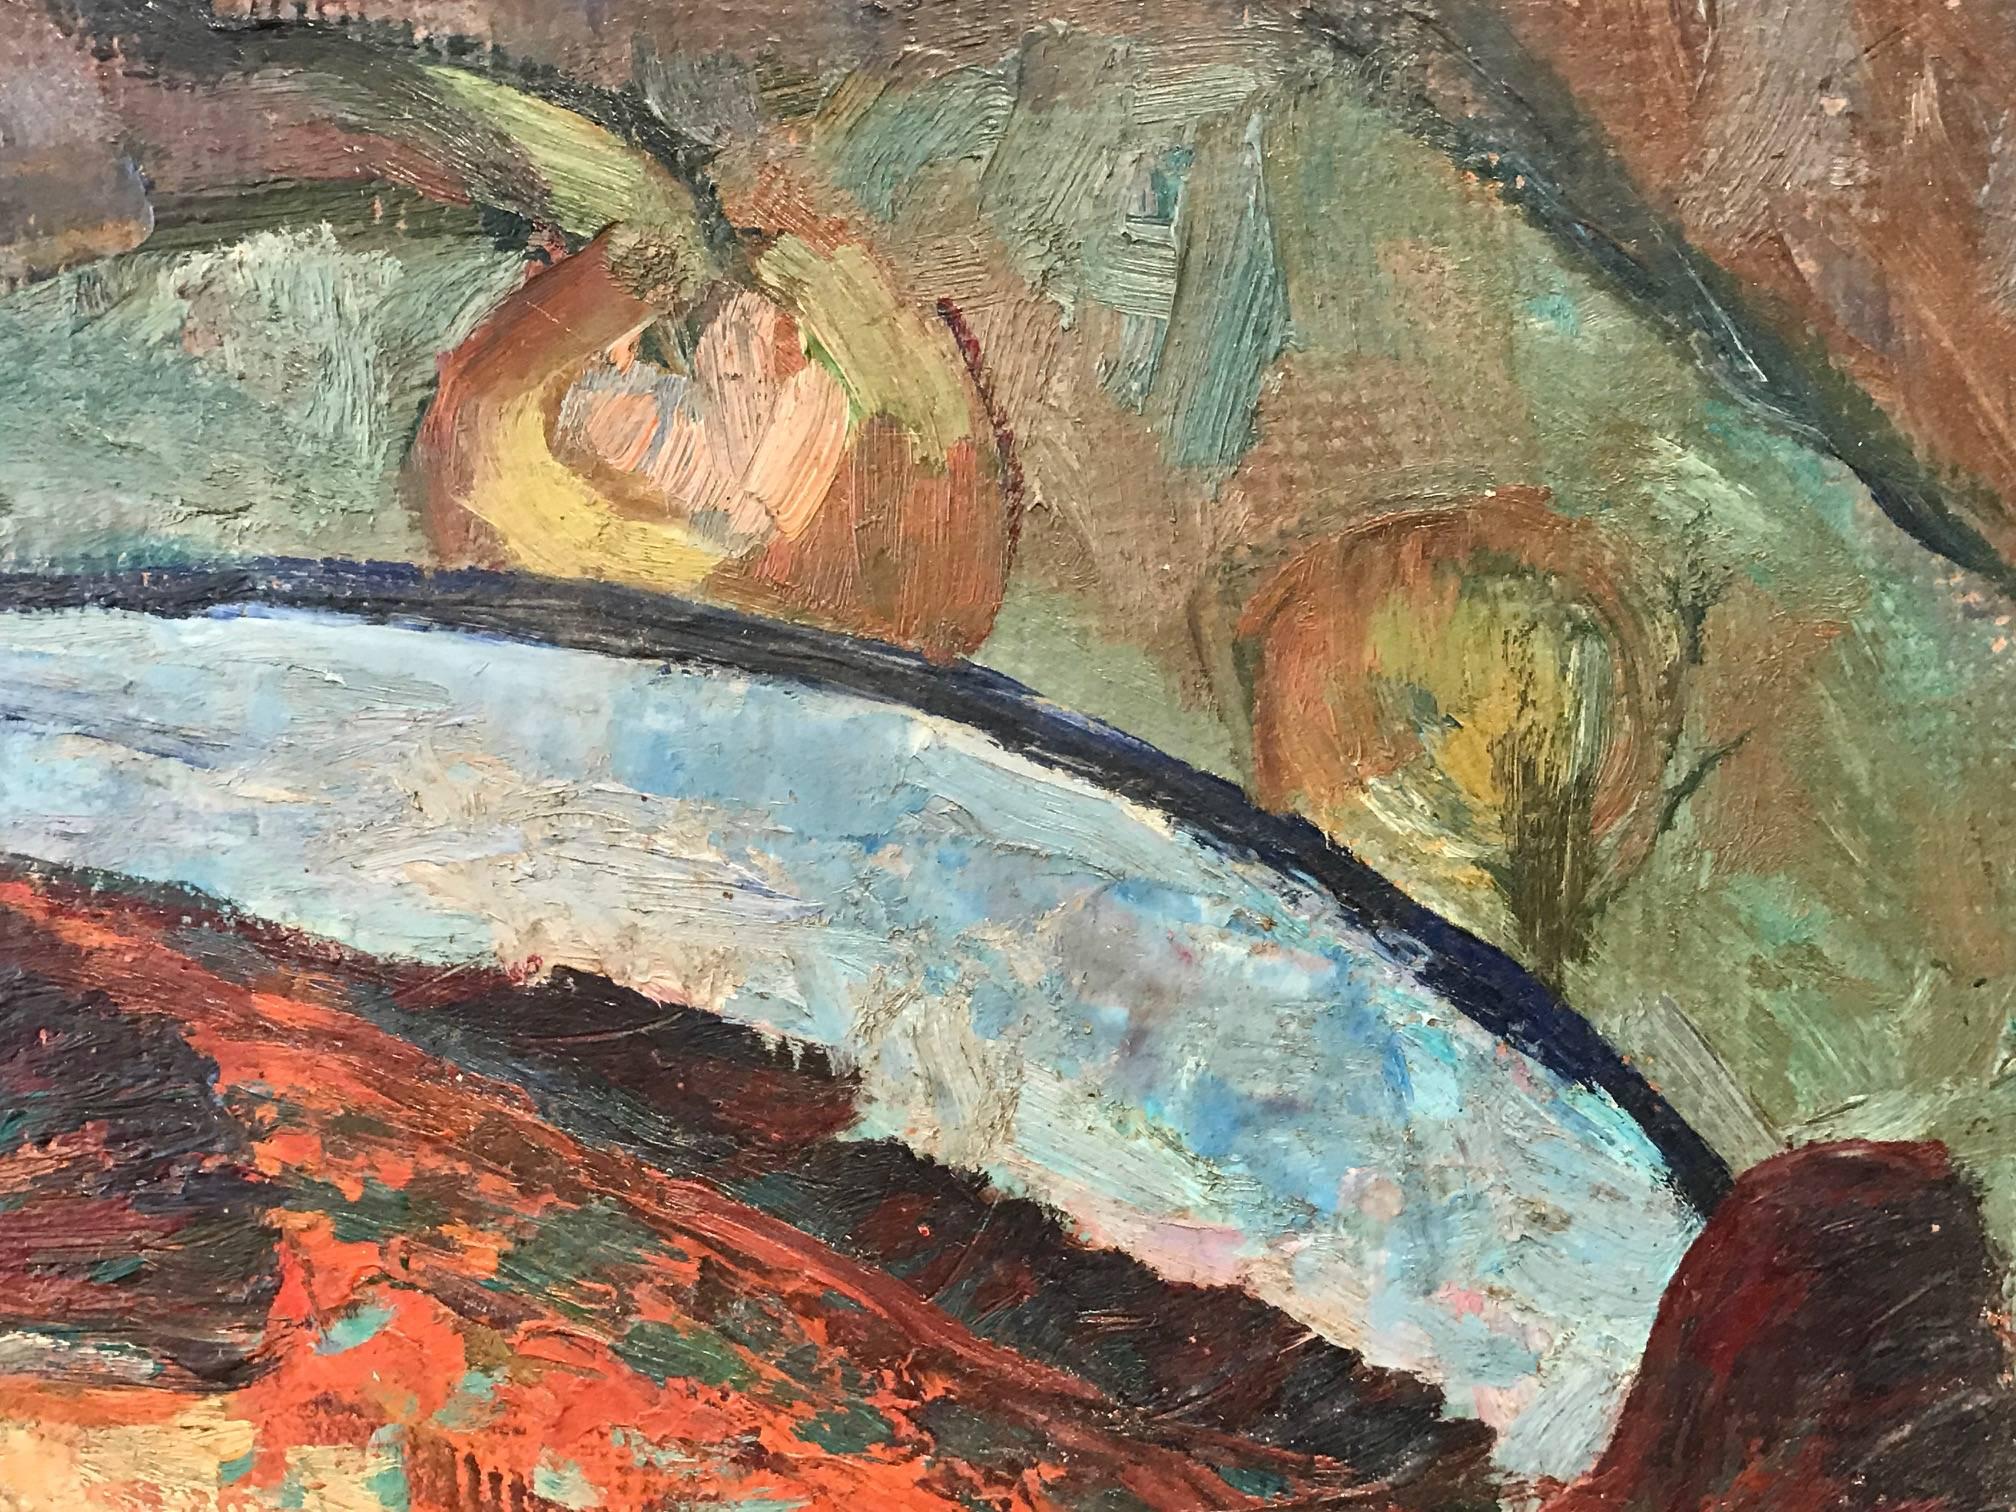 Mid 20th century French Post-Impressionist Oil Painting - Fish on Plate - Brown Still-Life Painting by J. P. Blanche